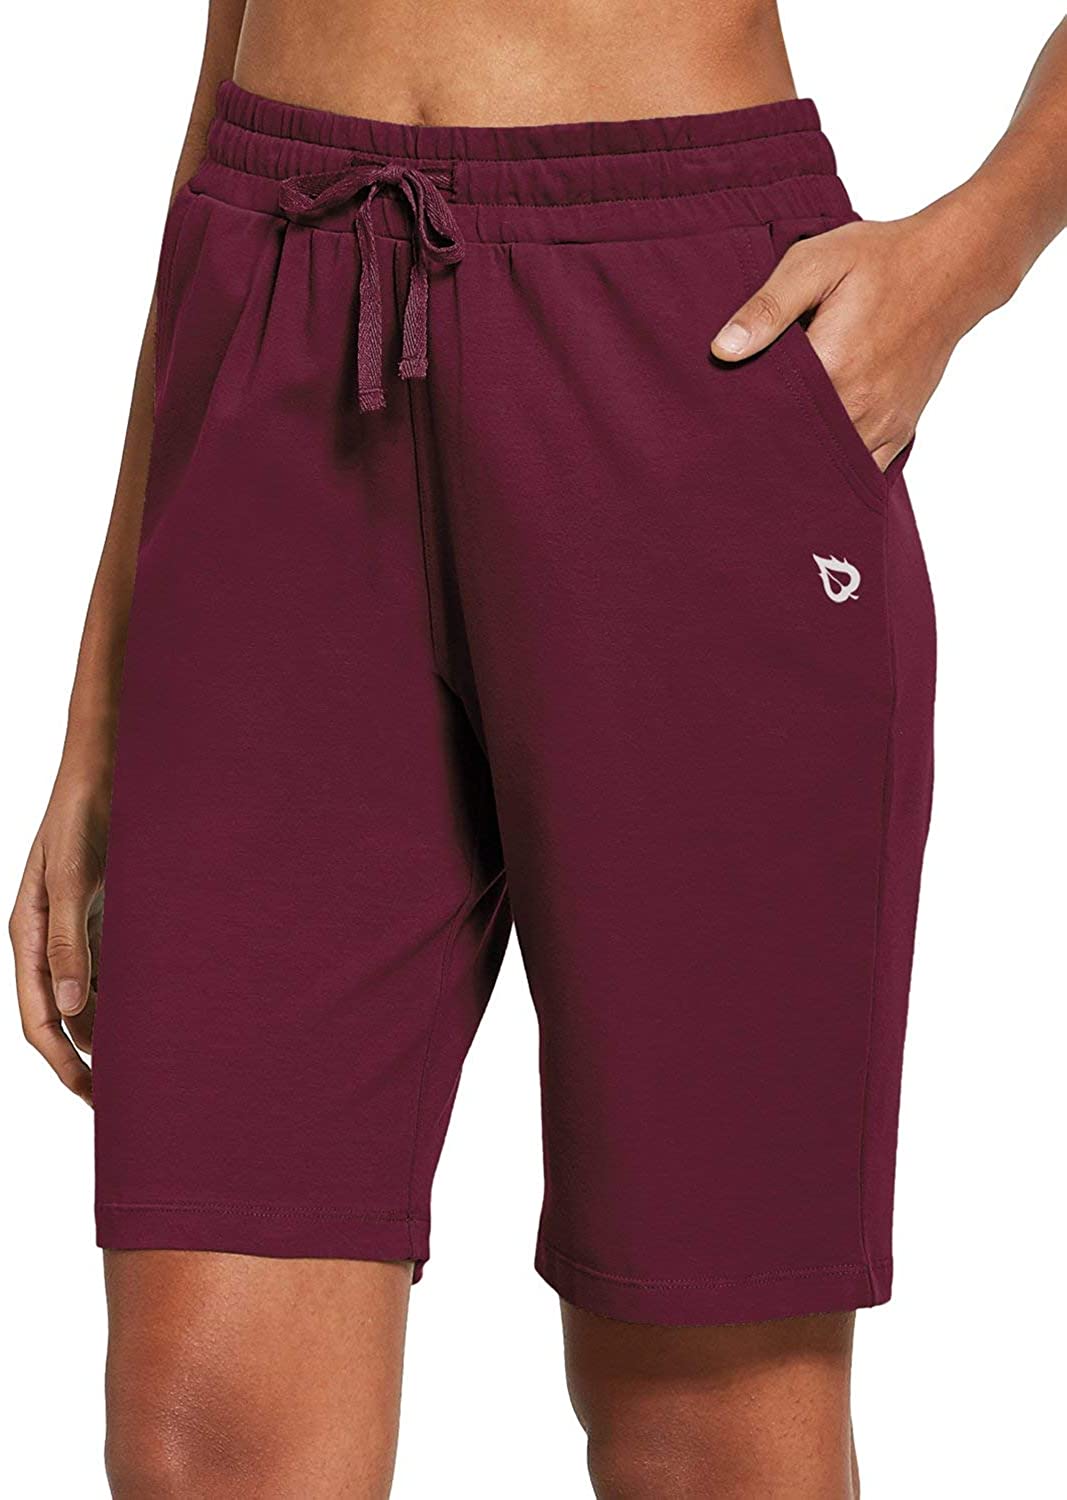 BALEAF Women's Bermuda Shorts Long Cotton Jersey with Pockets Athletic  Sweat Wal